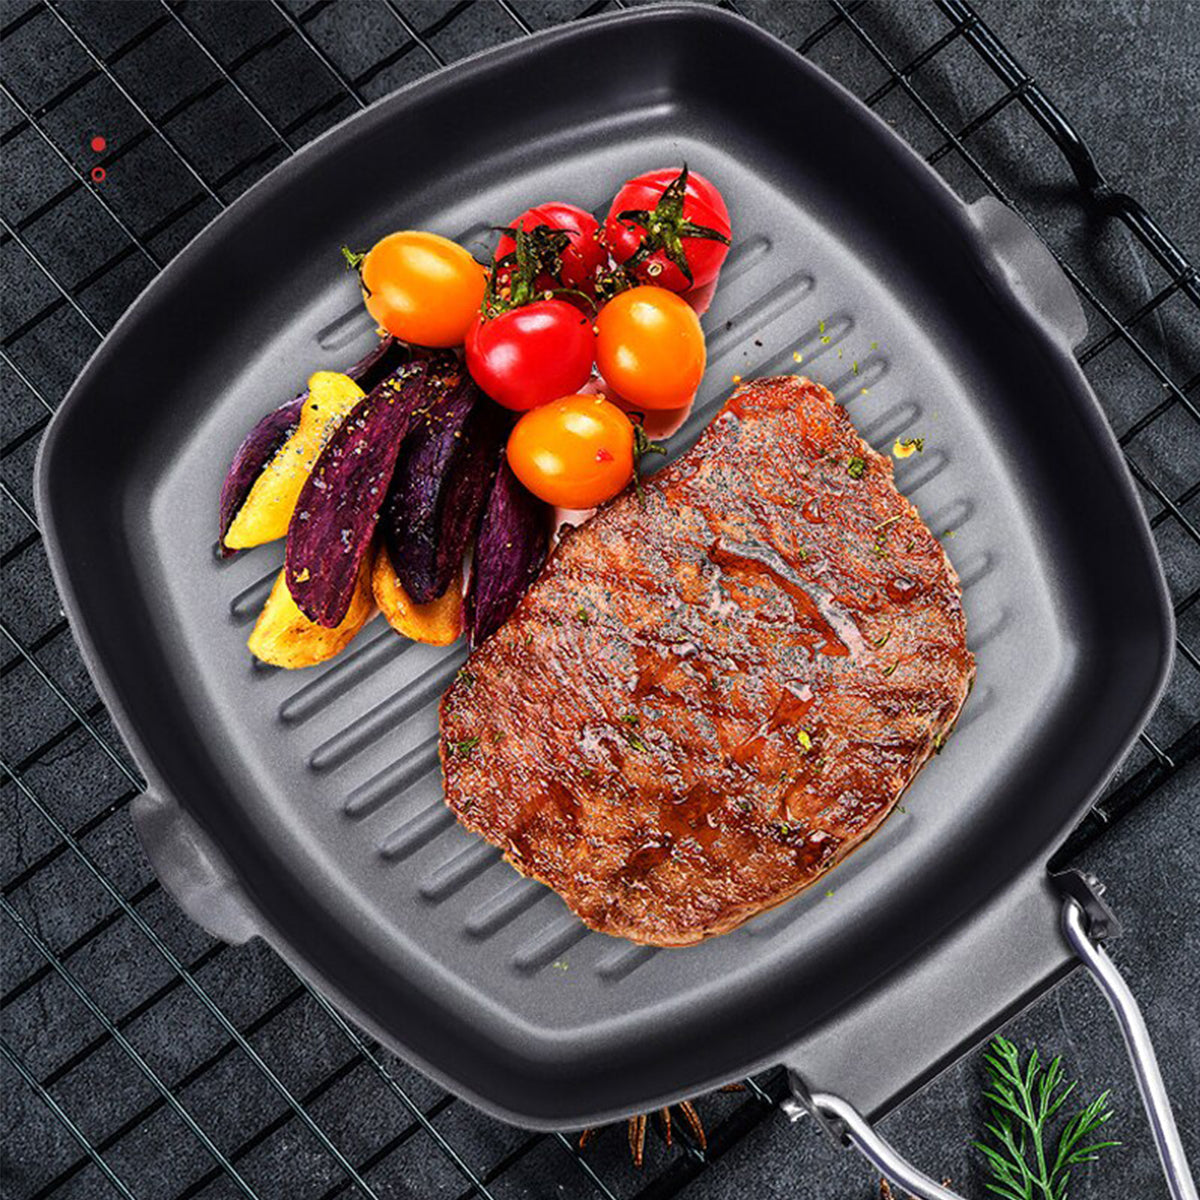 Professional Grill Pan